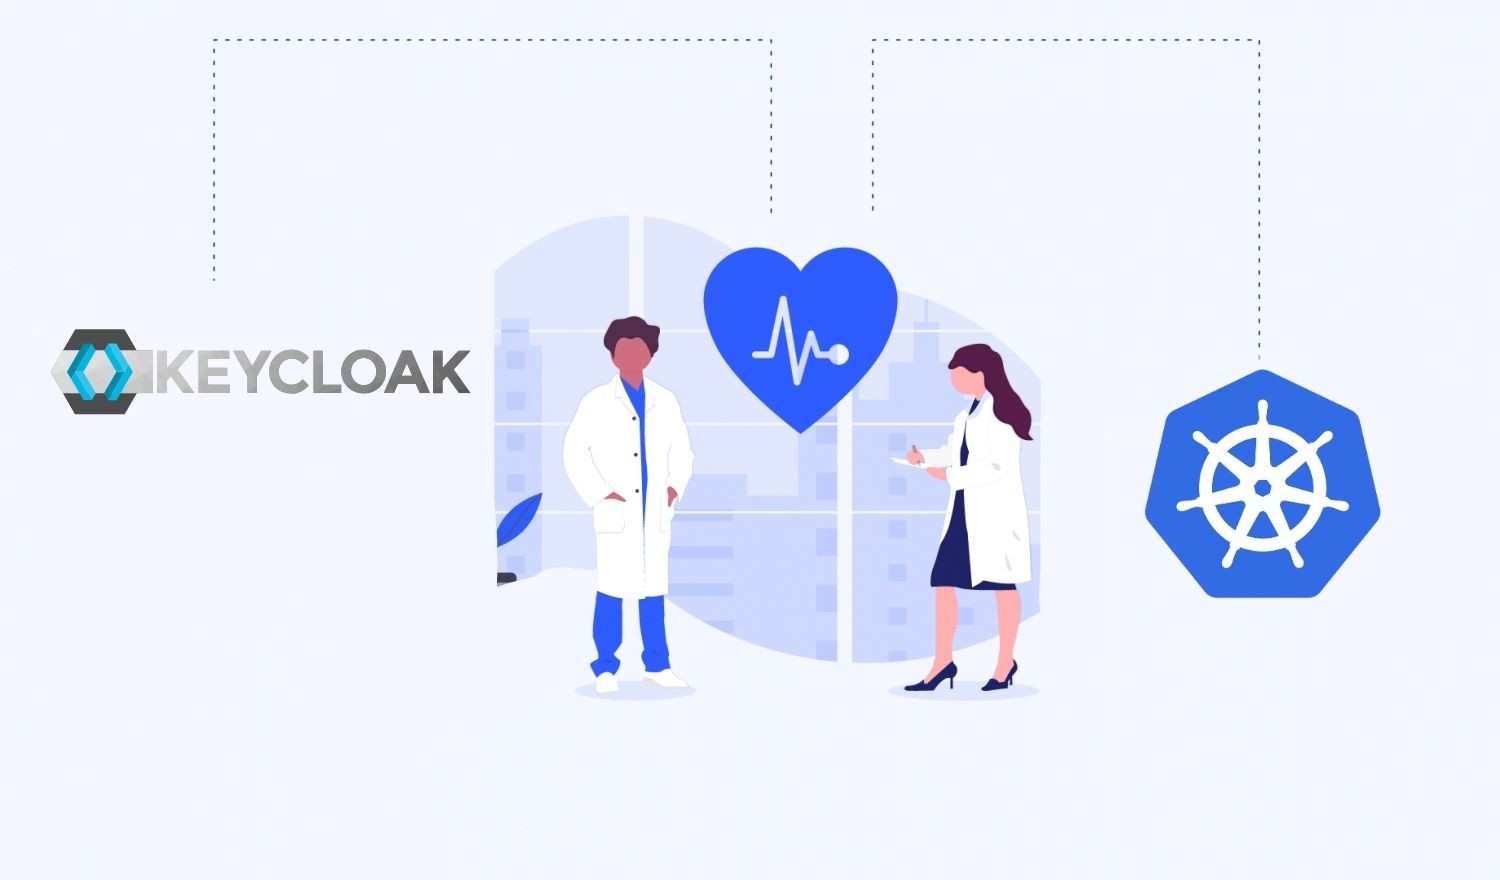 Kubernetes-logo and keycloak-logo are connected to heart with heartbeat that is placed between two people in white coats